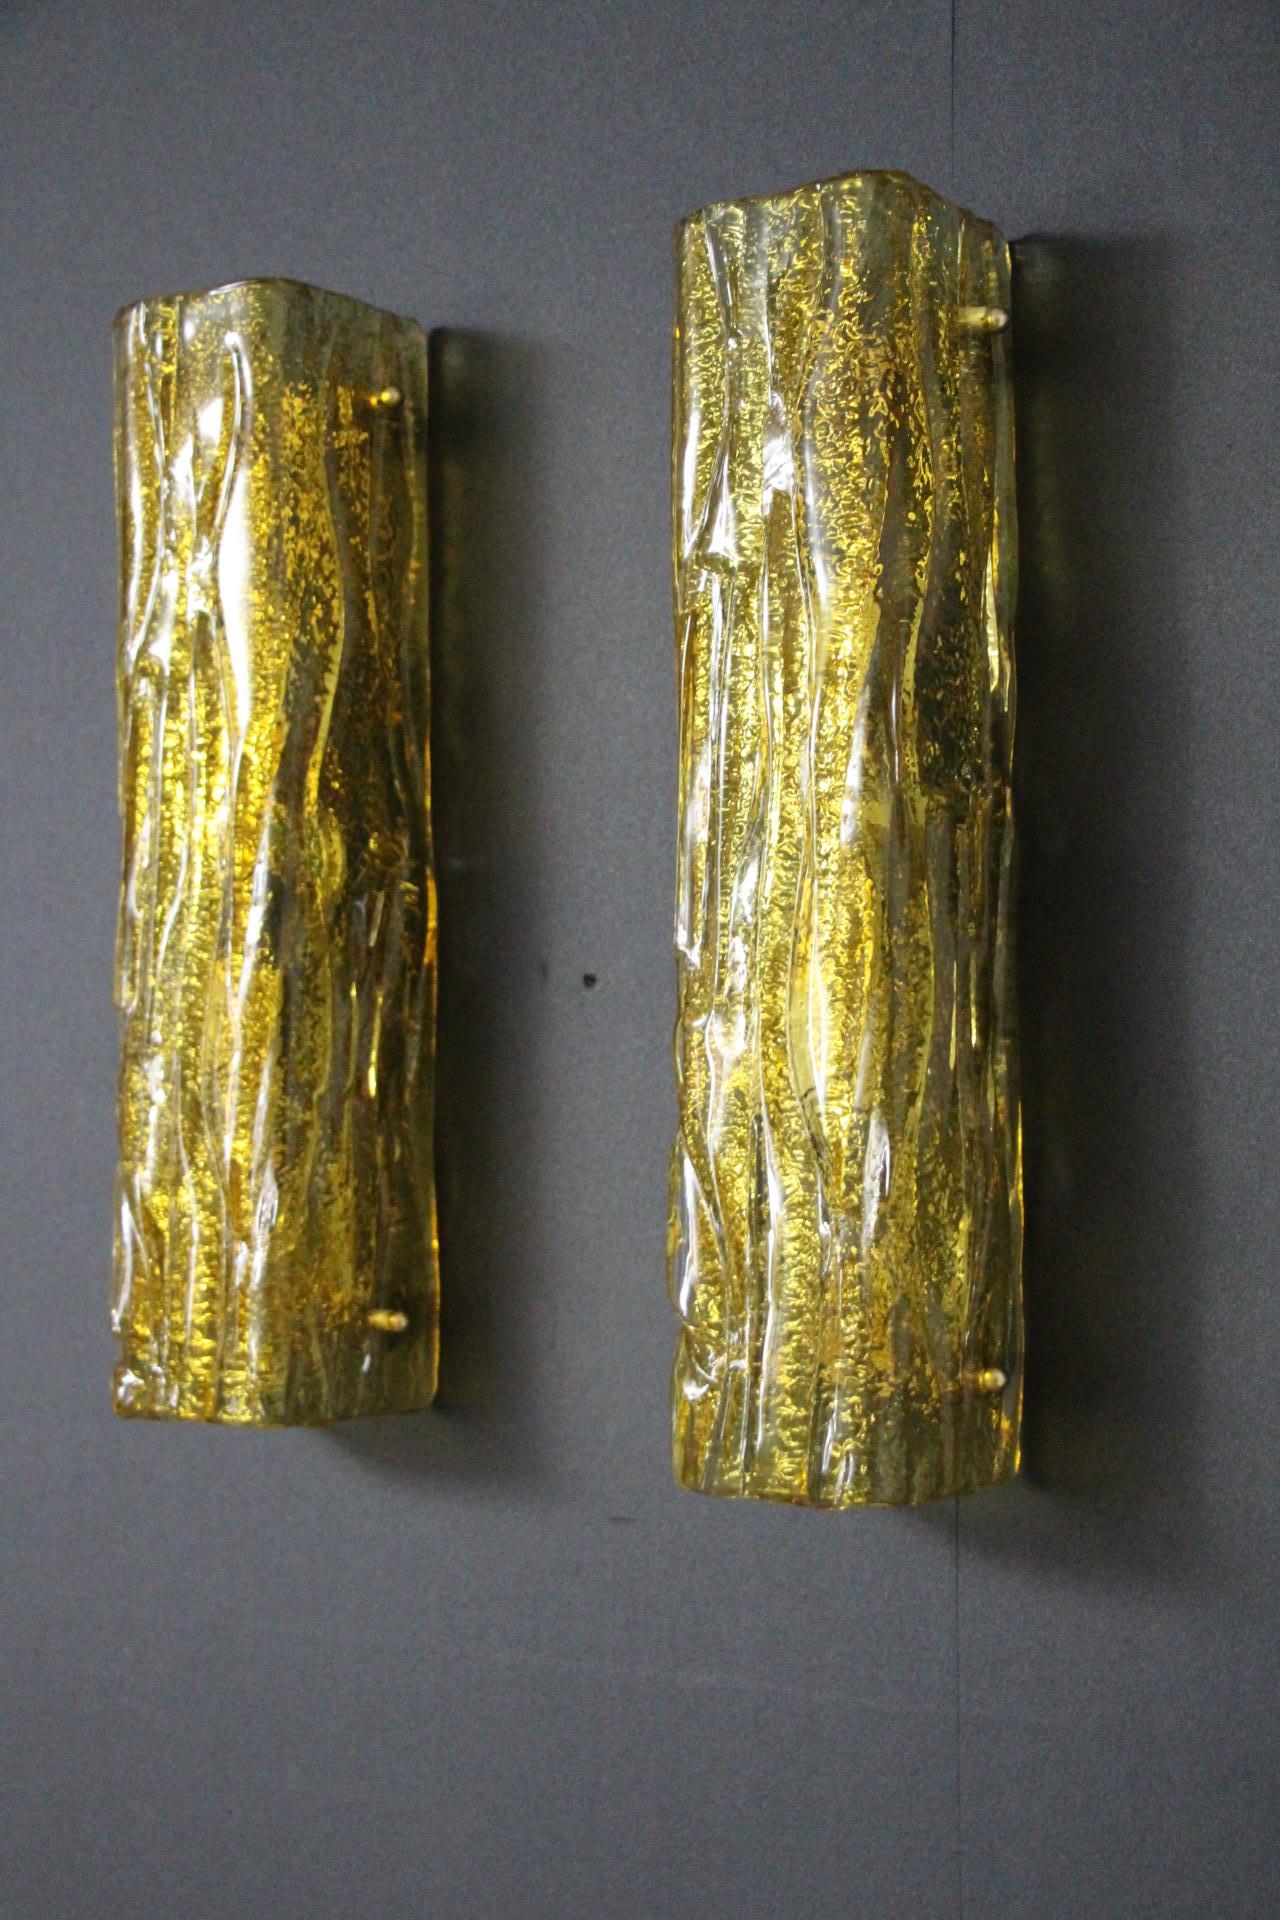 Pair of Golden Murano Glass Sconces, Square Tube Wall Lights, Mazzega Style In Excellent Condition For Sale In Saint-Ouen, FR